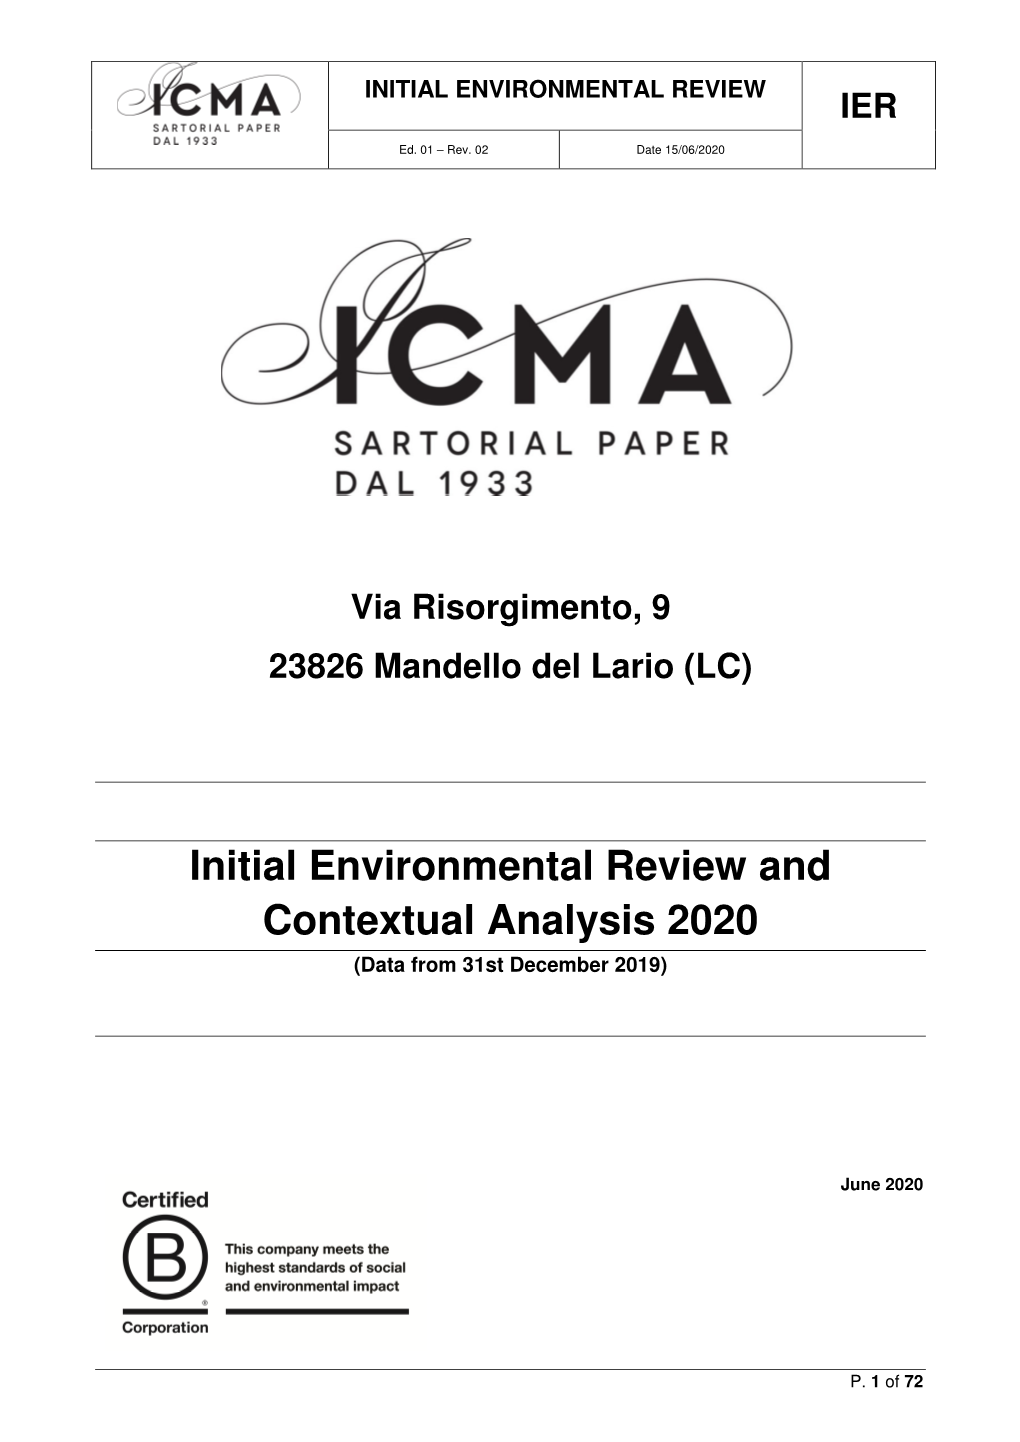 Initial Environmental Review and Contextual Analysis 2020 (Data from 31St December 2019)